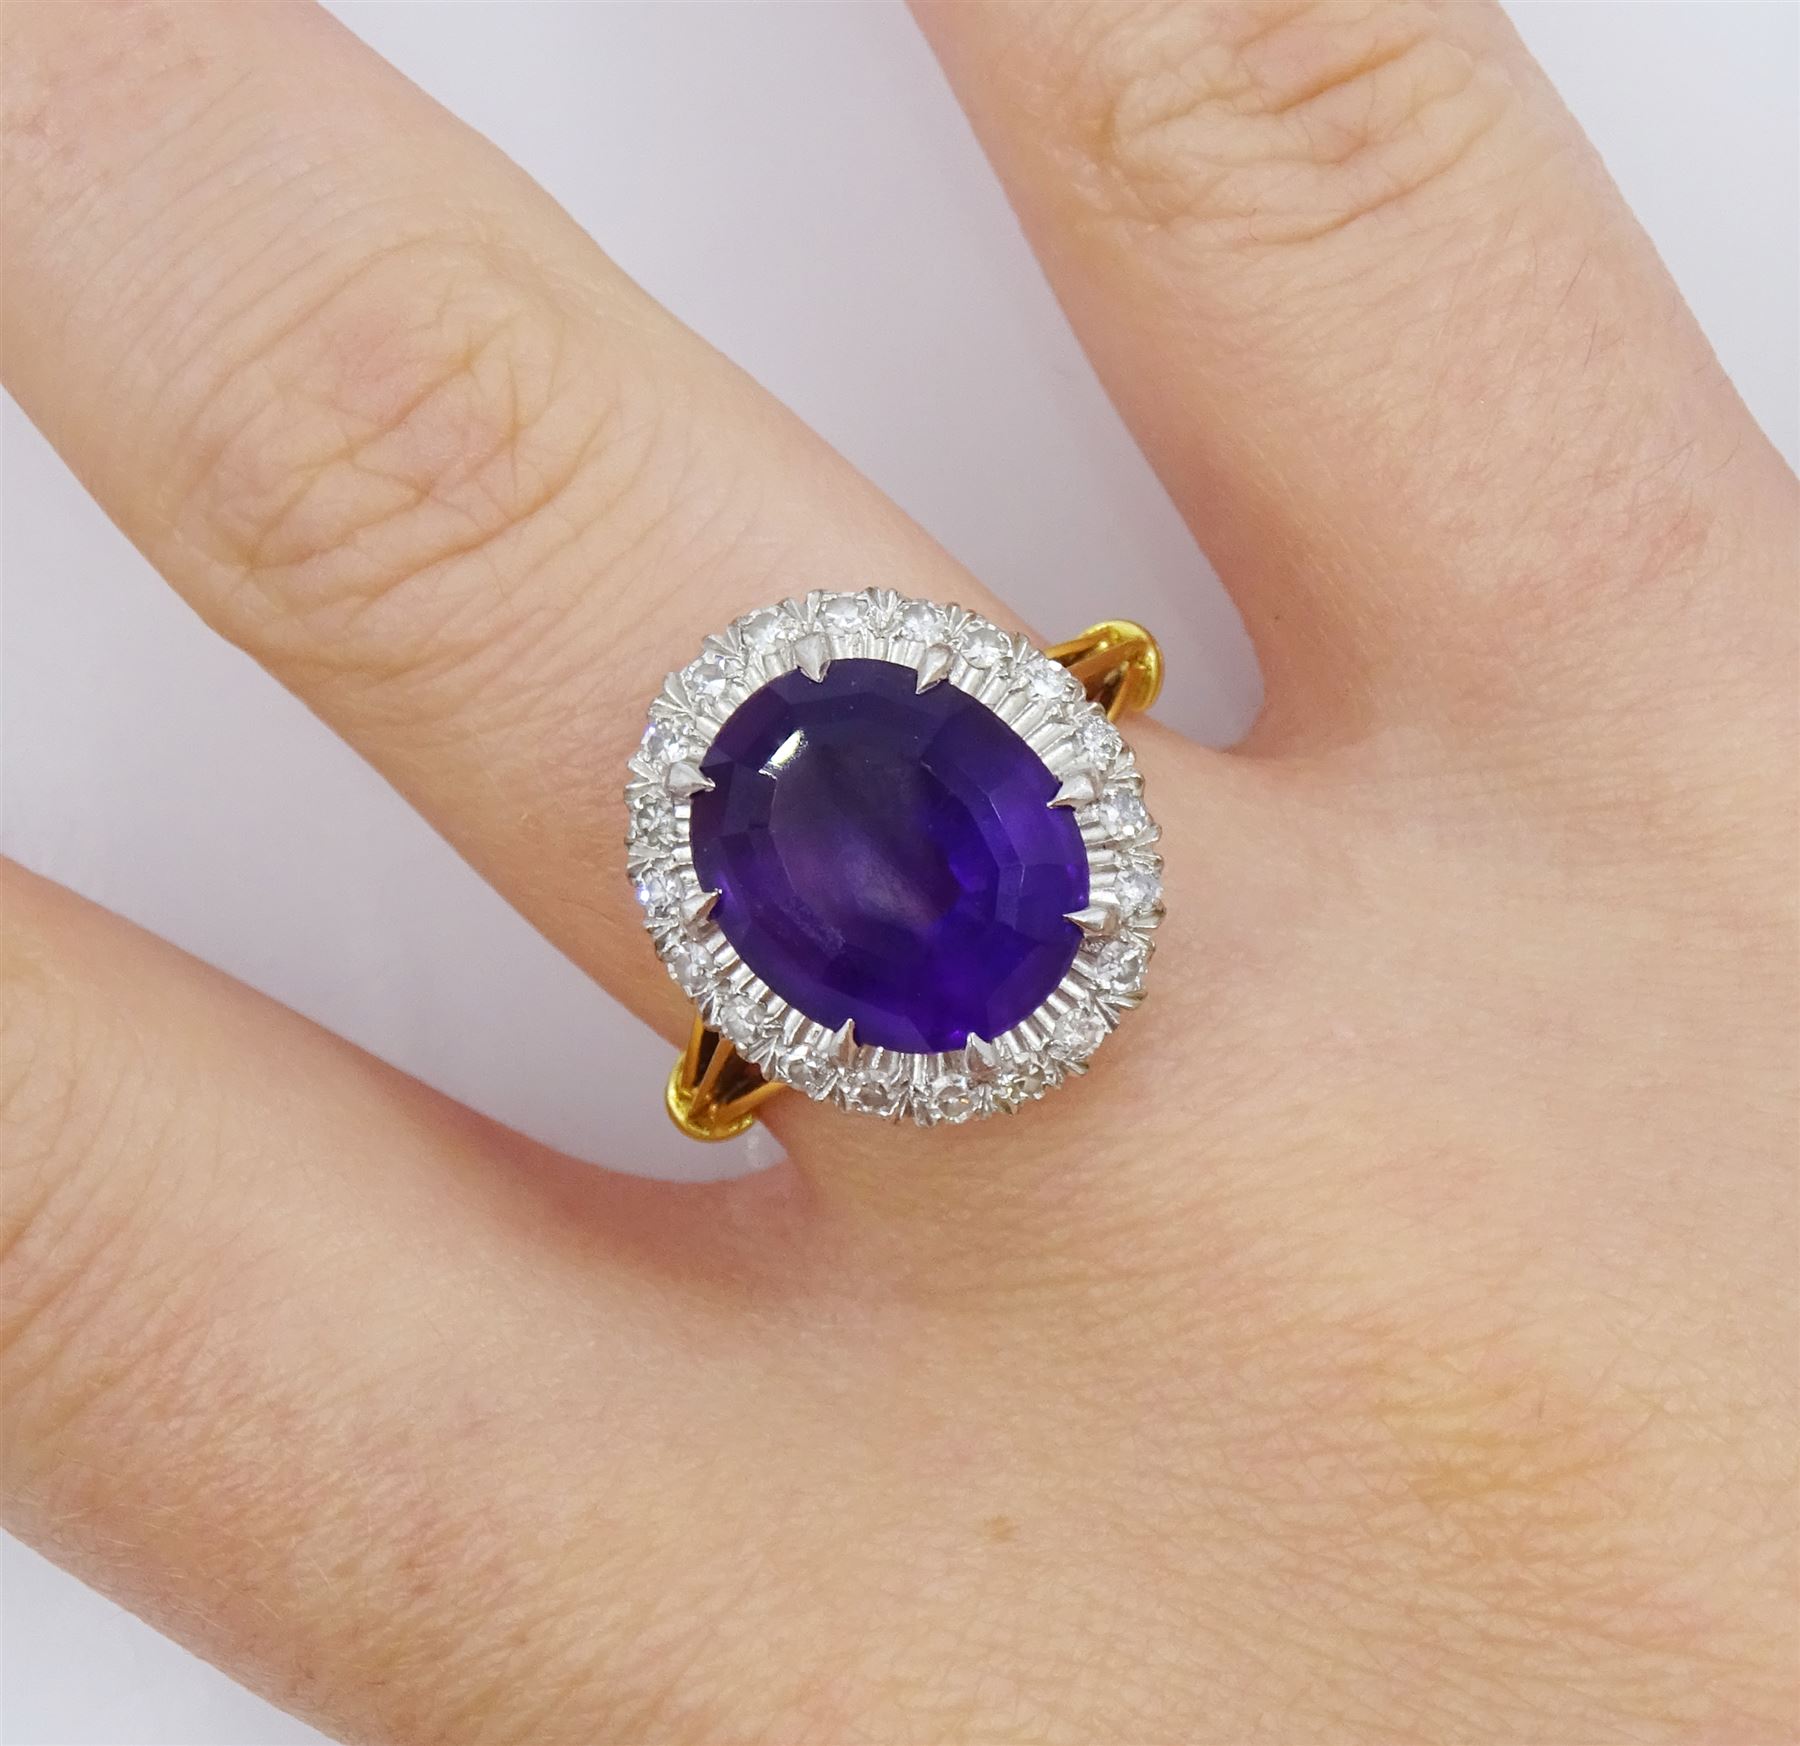 18ct gold oval cut amethyst and diamond cluster ring - Image 2 of 4